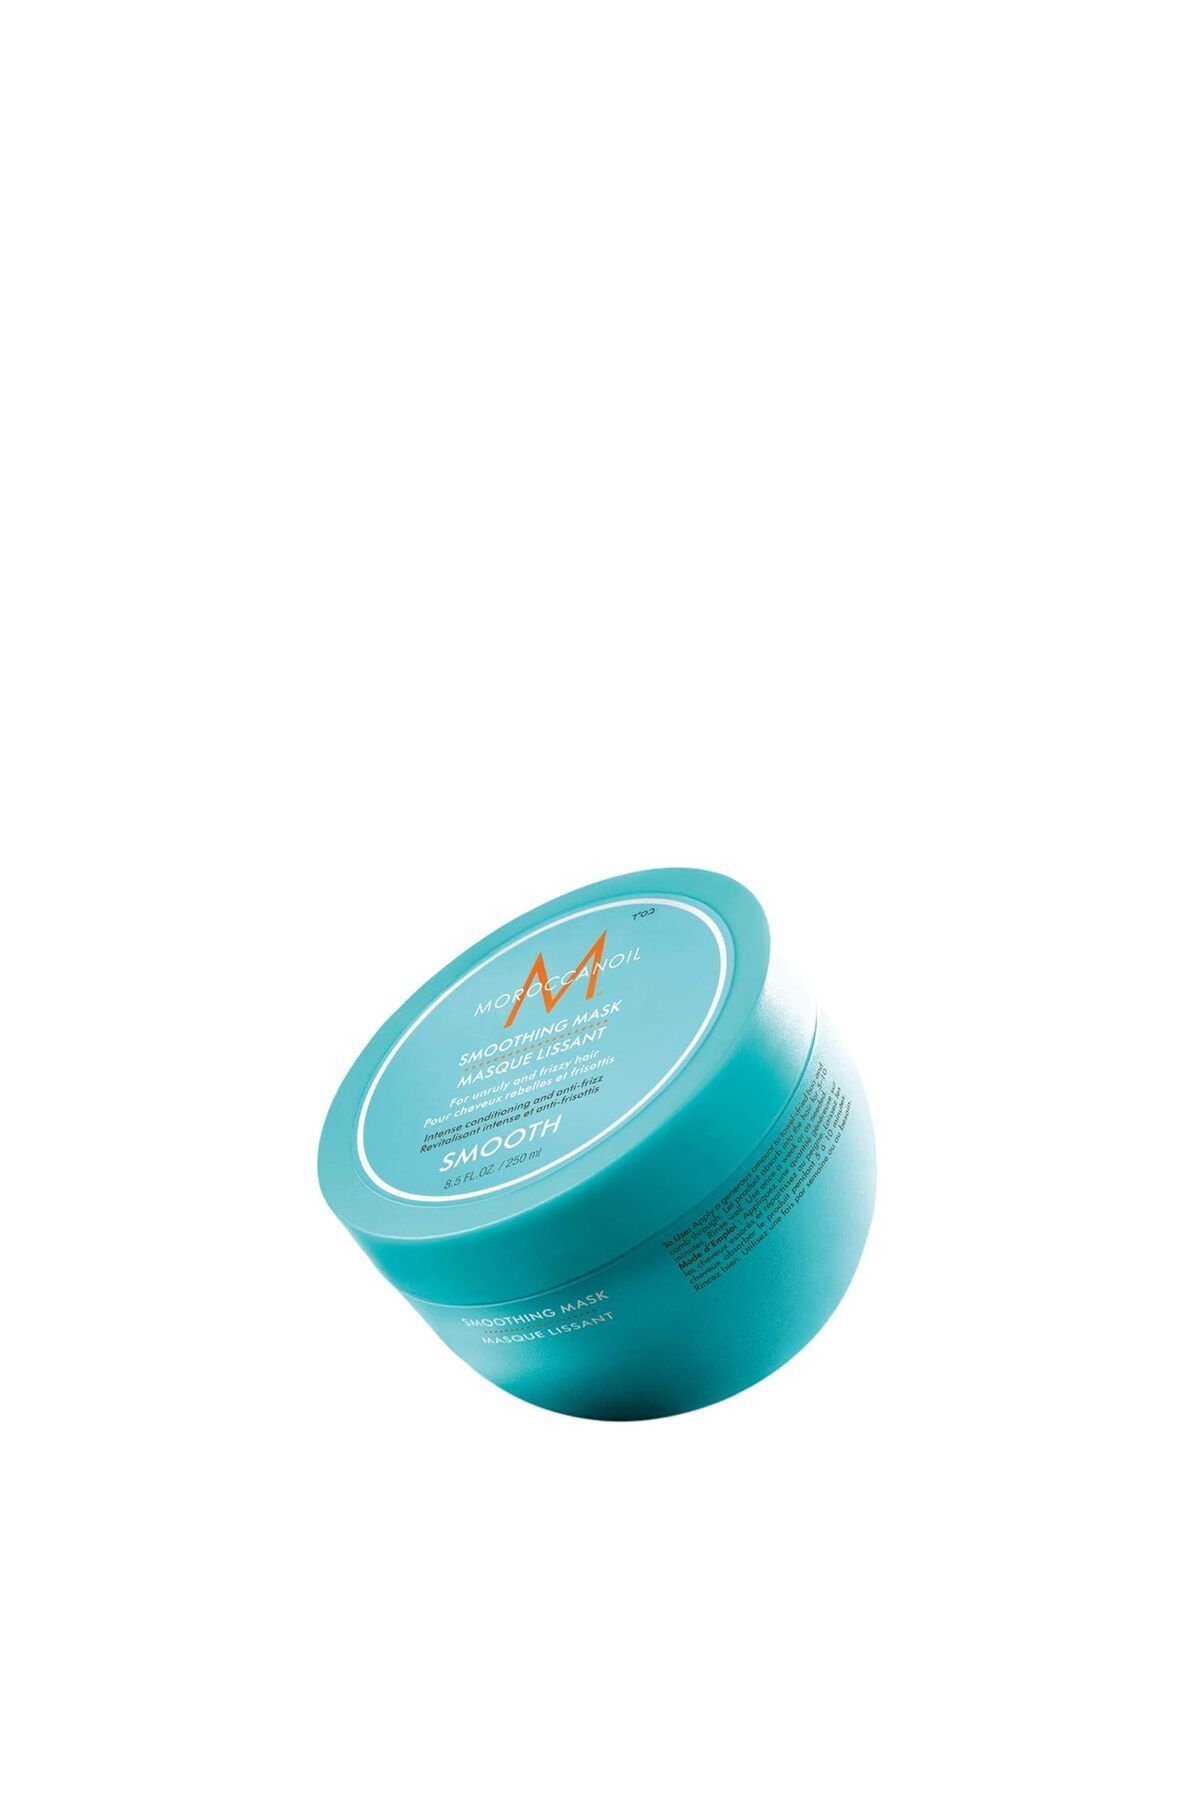 Moroccanoil SMOOTH Concentrated Hair Mask with Argan Oil for Unruly&Frizzy Hair 250ml E.X11 Trusty7